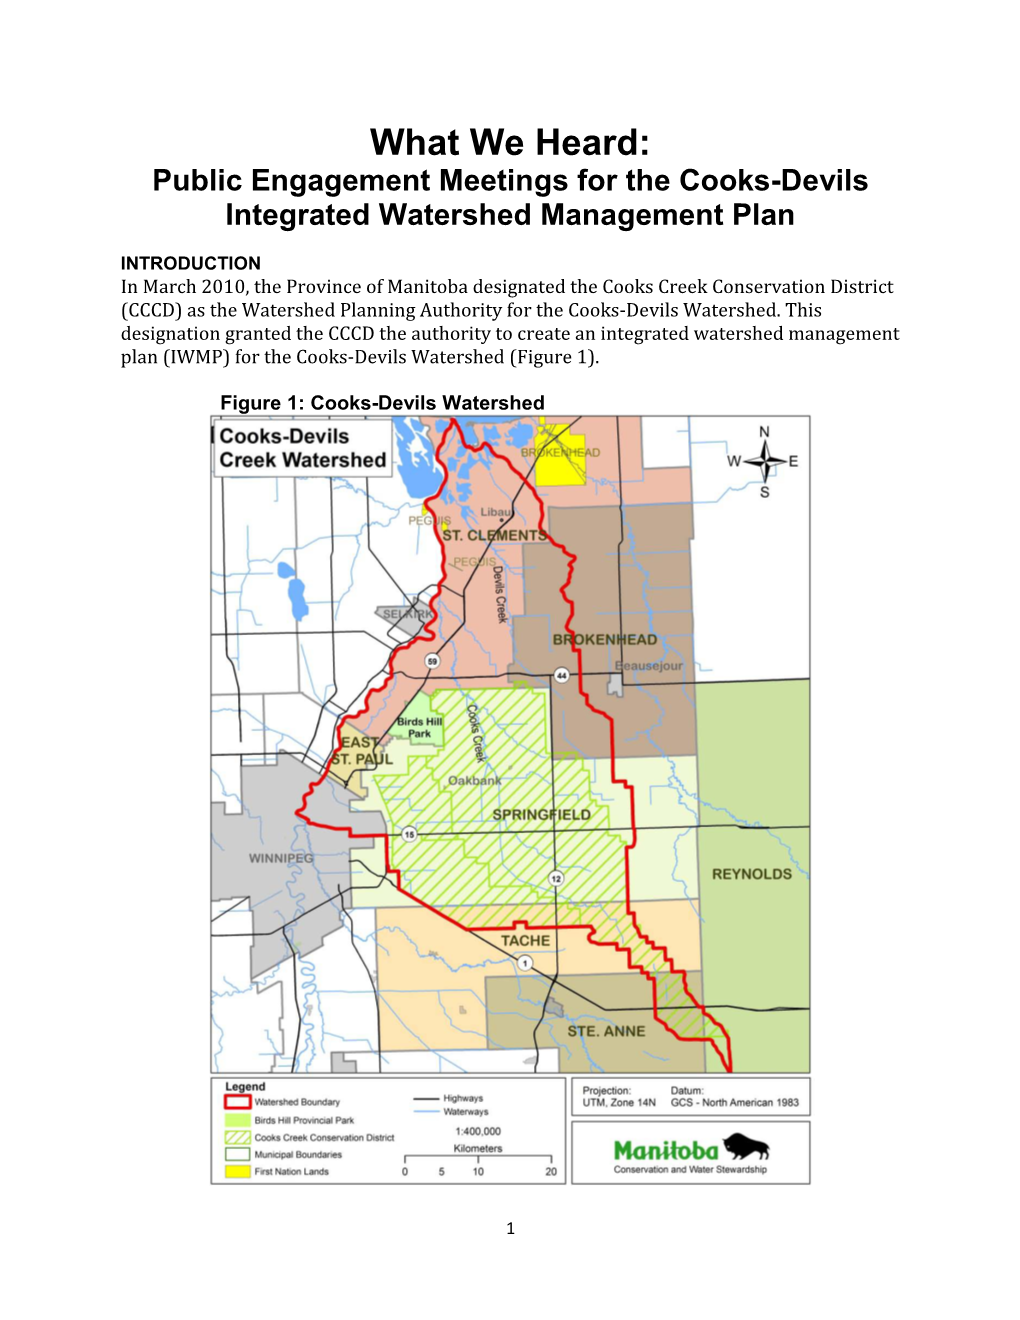 What We Heard: Public Engagement Meetings for the Cooks-Devils Integrated Watershed Management Plan